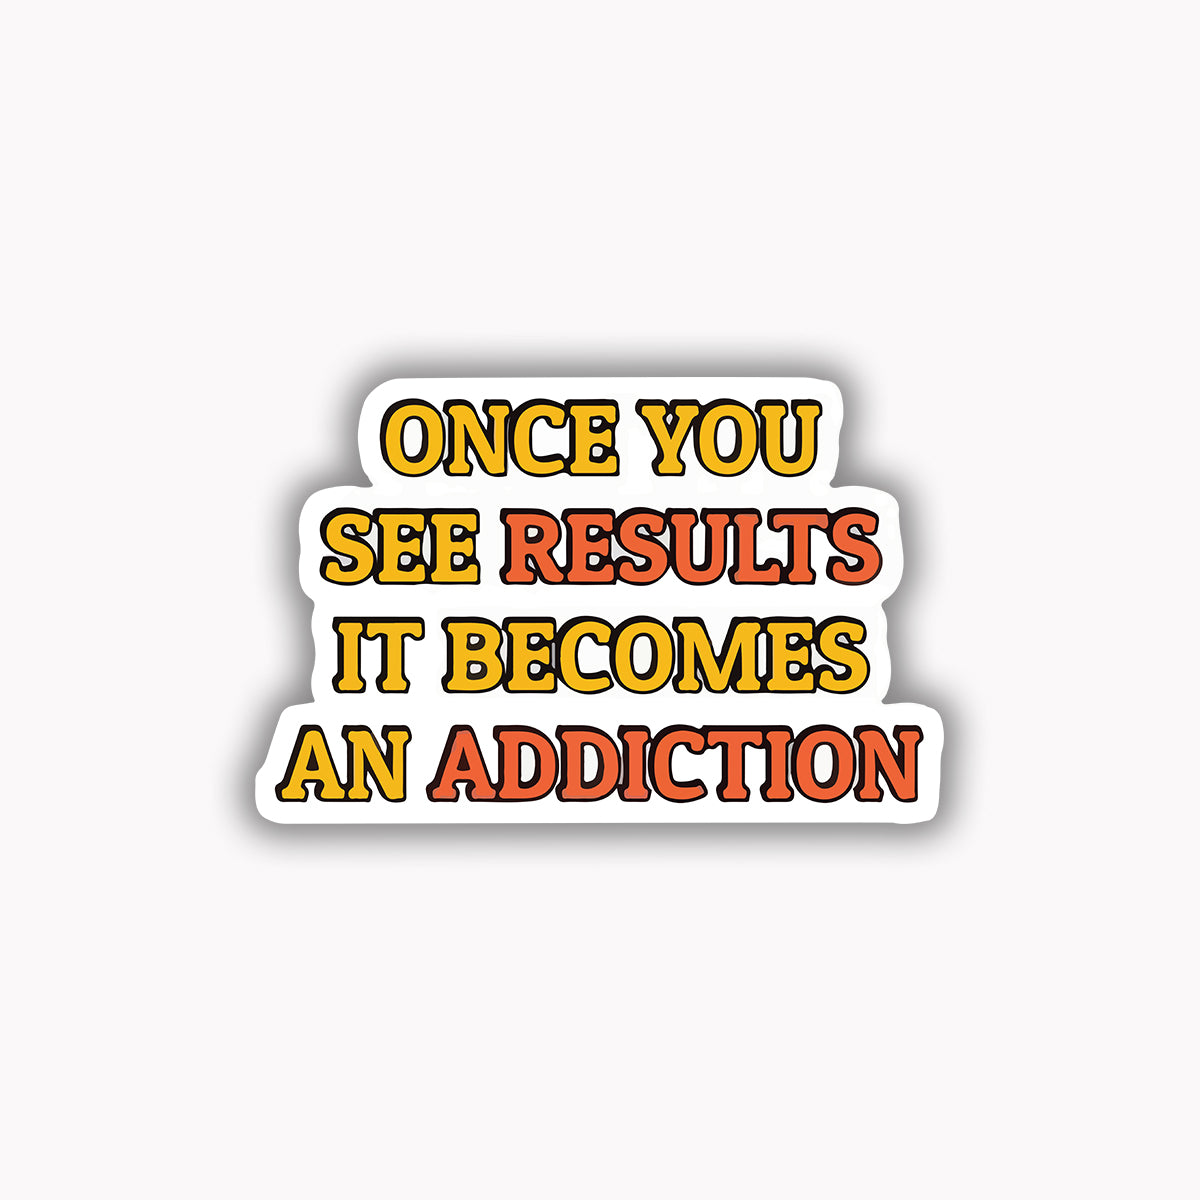 Once you see results it becomes an addiction